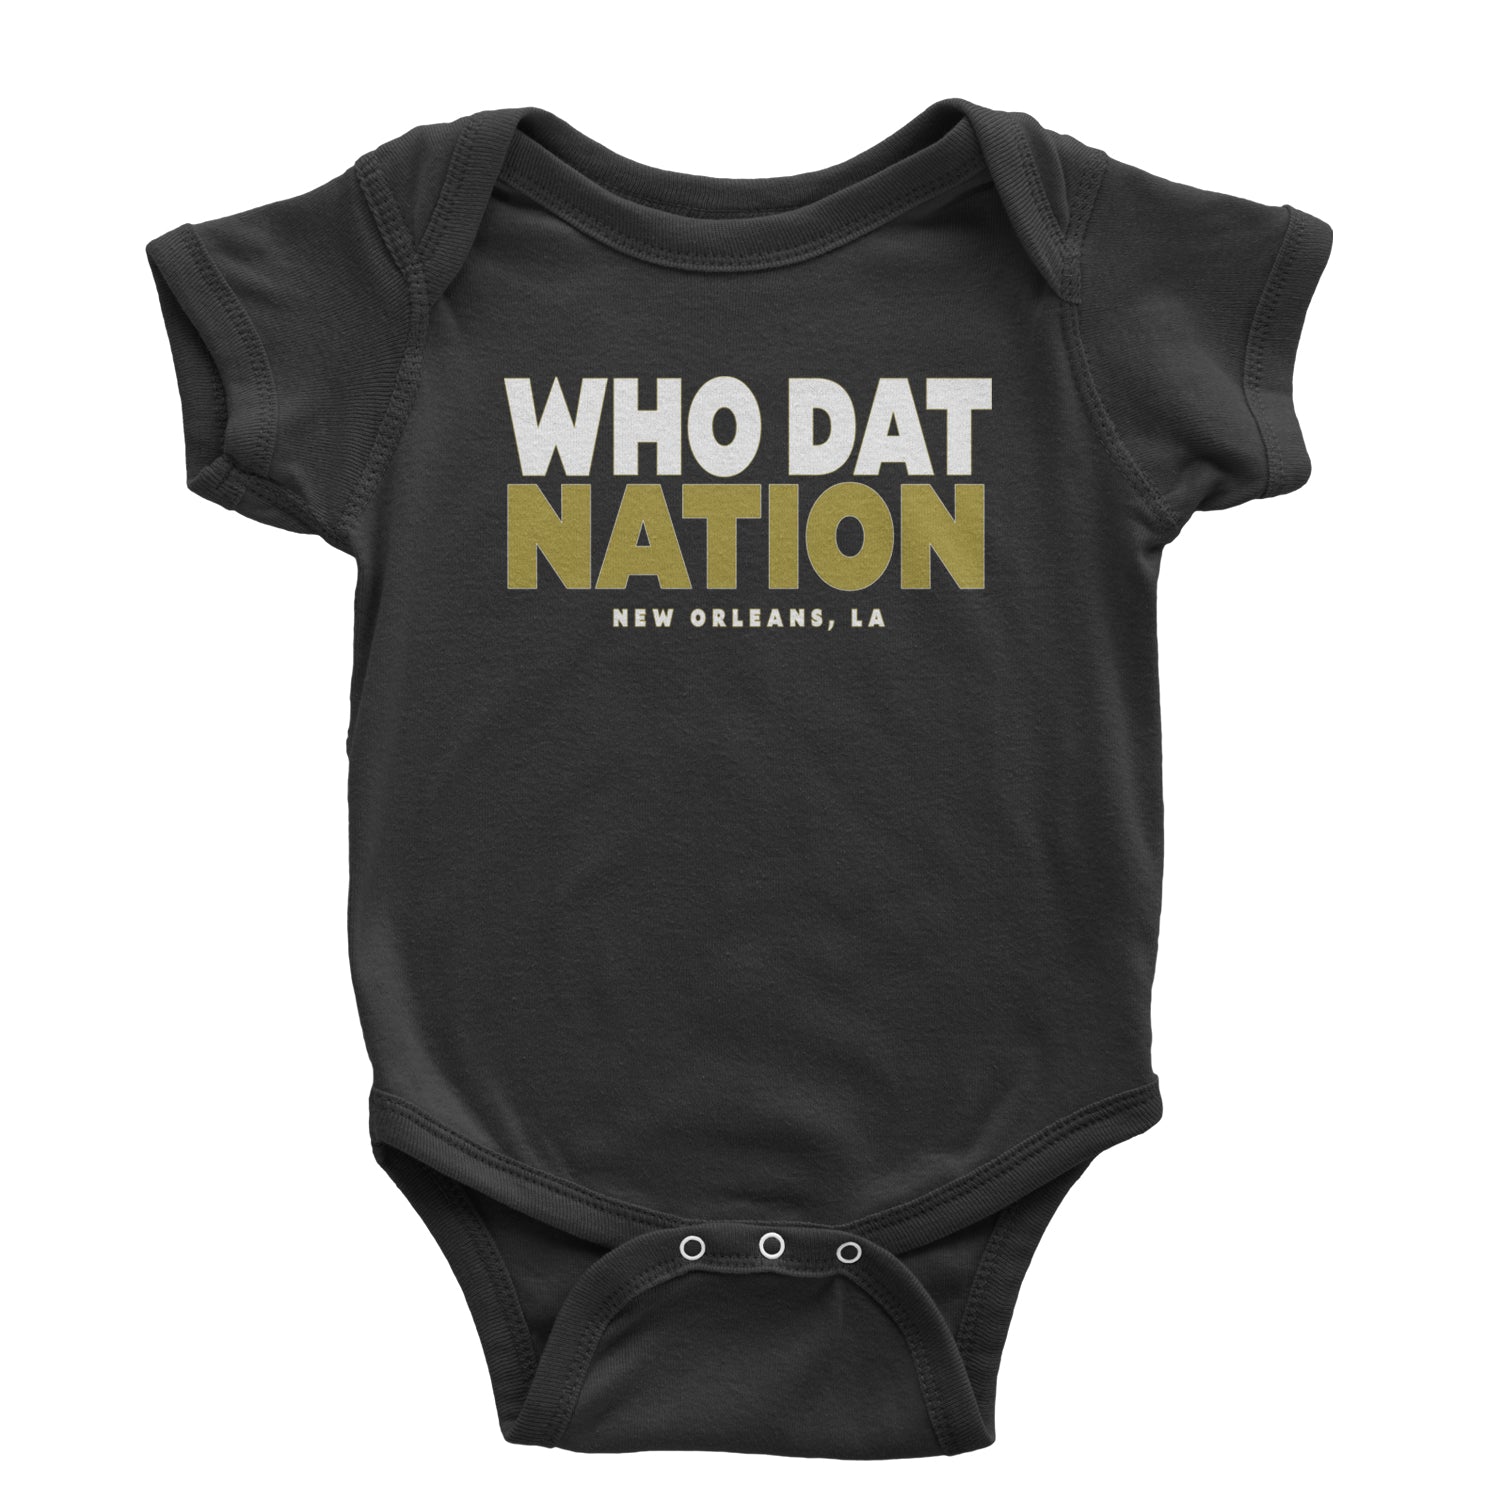 New Orleans Who Dat Nation Infant One-Piece Romper Bodysuit and Toddler T-shirt